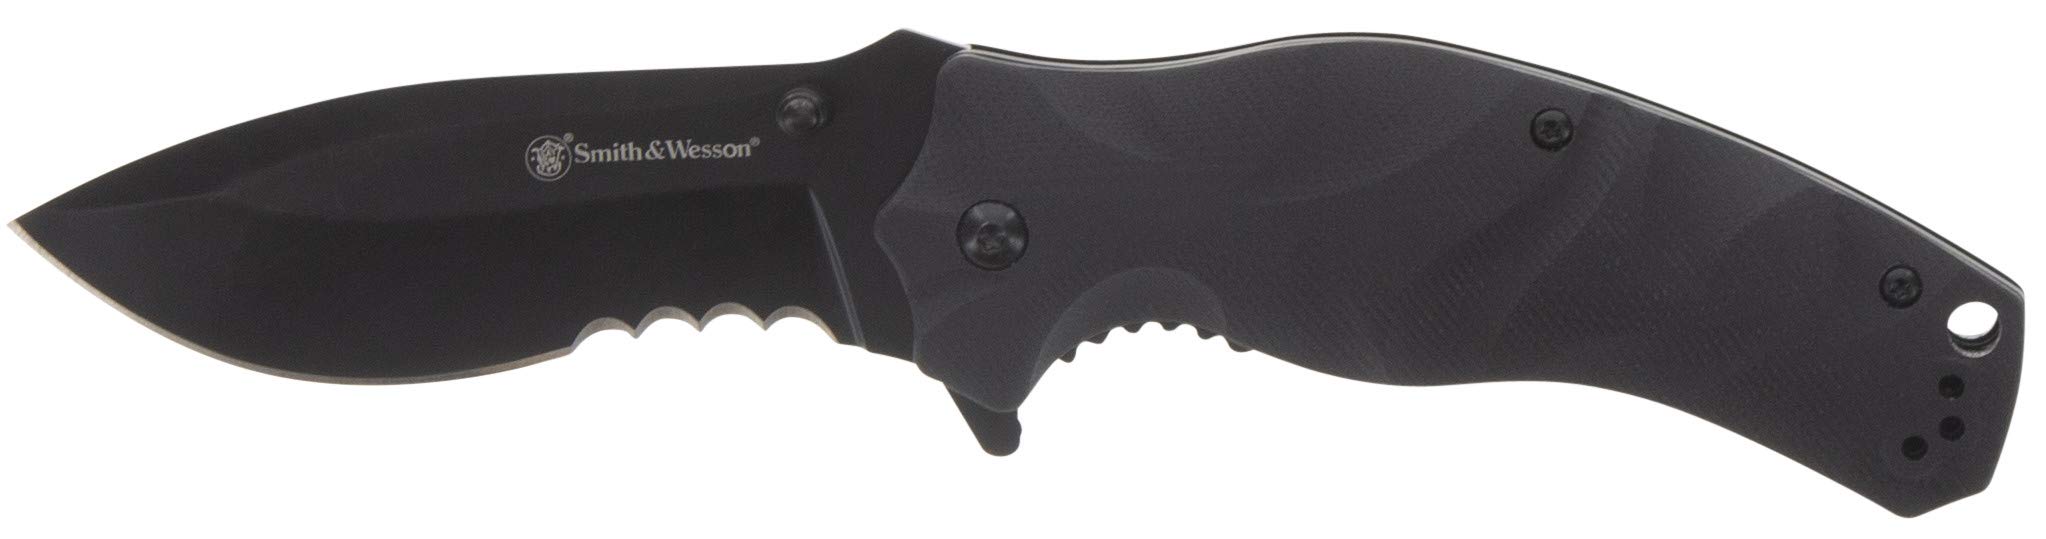 Smith & Wesson Adult Clam Folding Knife, Black, One Size US $26.34 + Free Shipping w/ Prime or on $35+